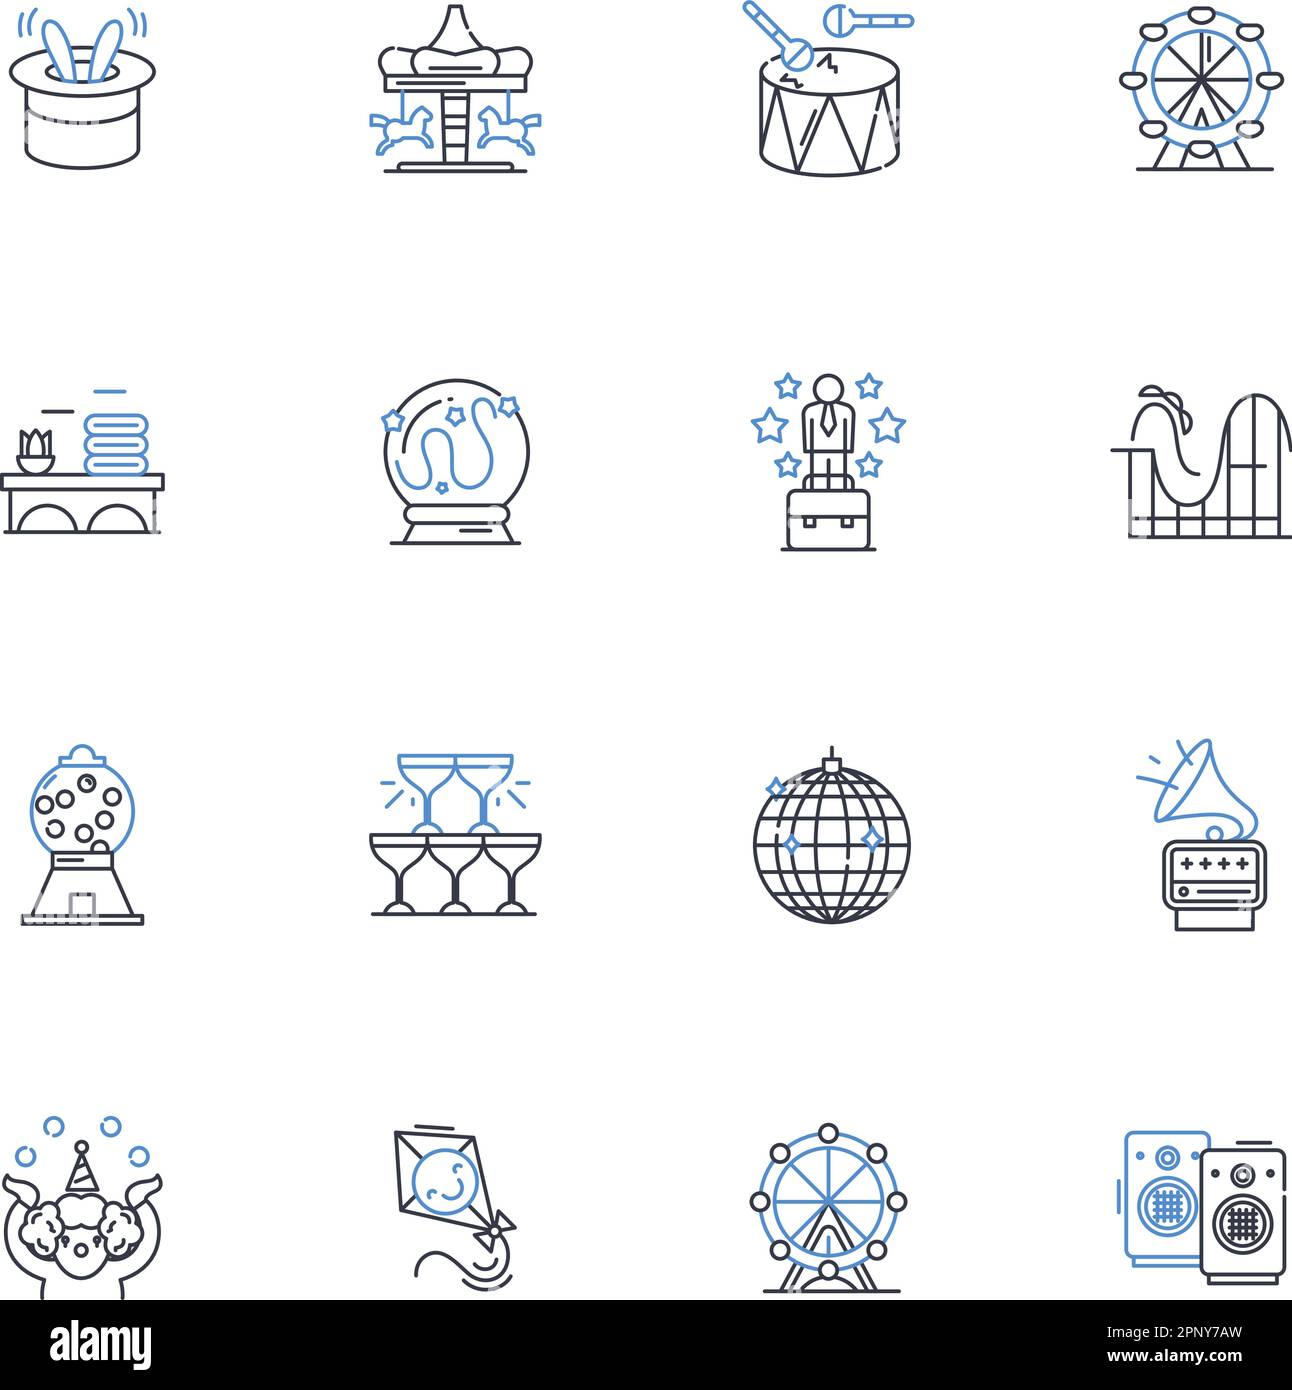 Funfair line icons collection. Rides, Carousel, Ferris wheel, Roller coaster, Clowns, Popcorn, Cotton candy vector and linear illustration. Arcade Stock Vector